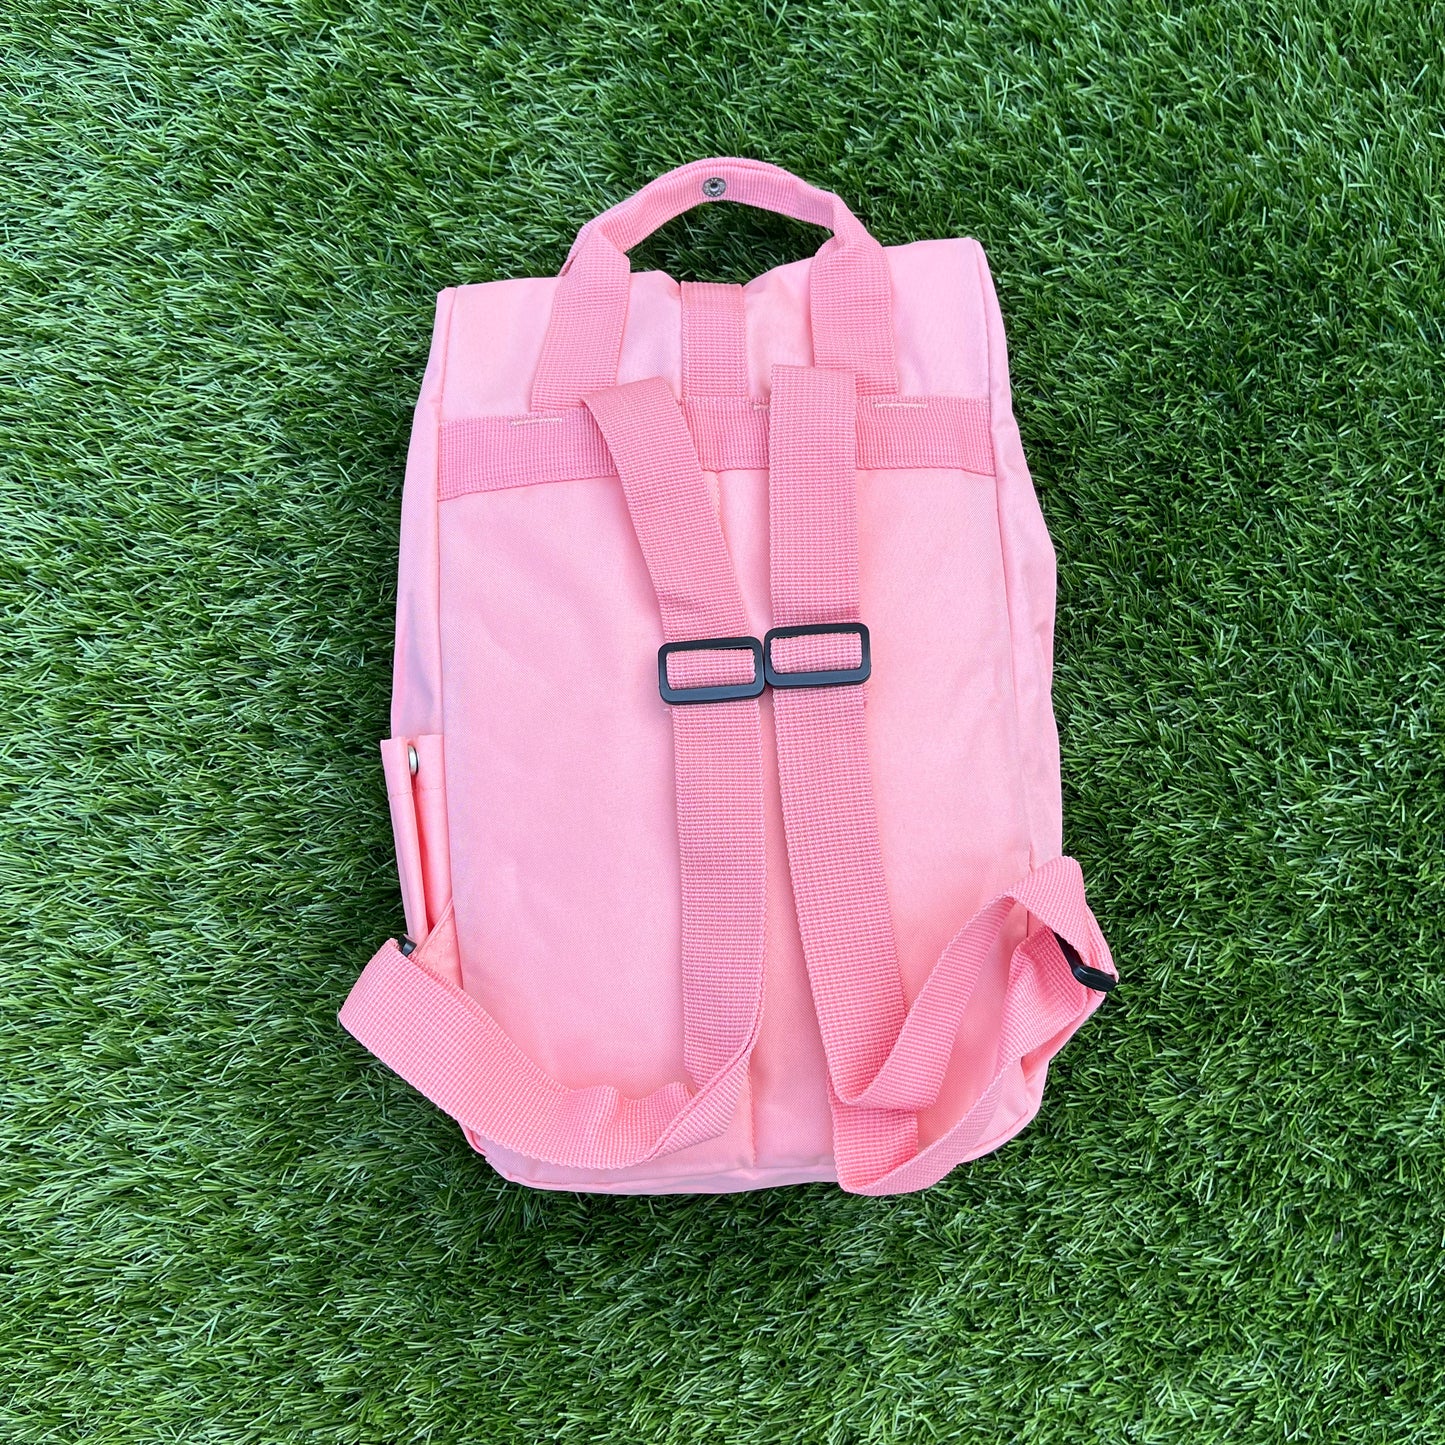 The Kids Backpack - 100% Recycled Polyester